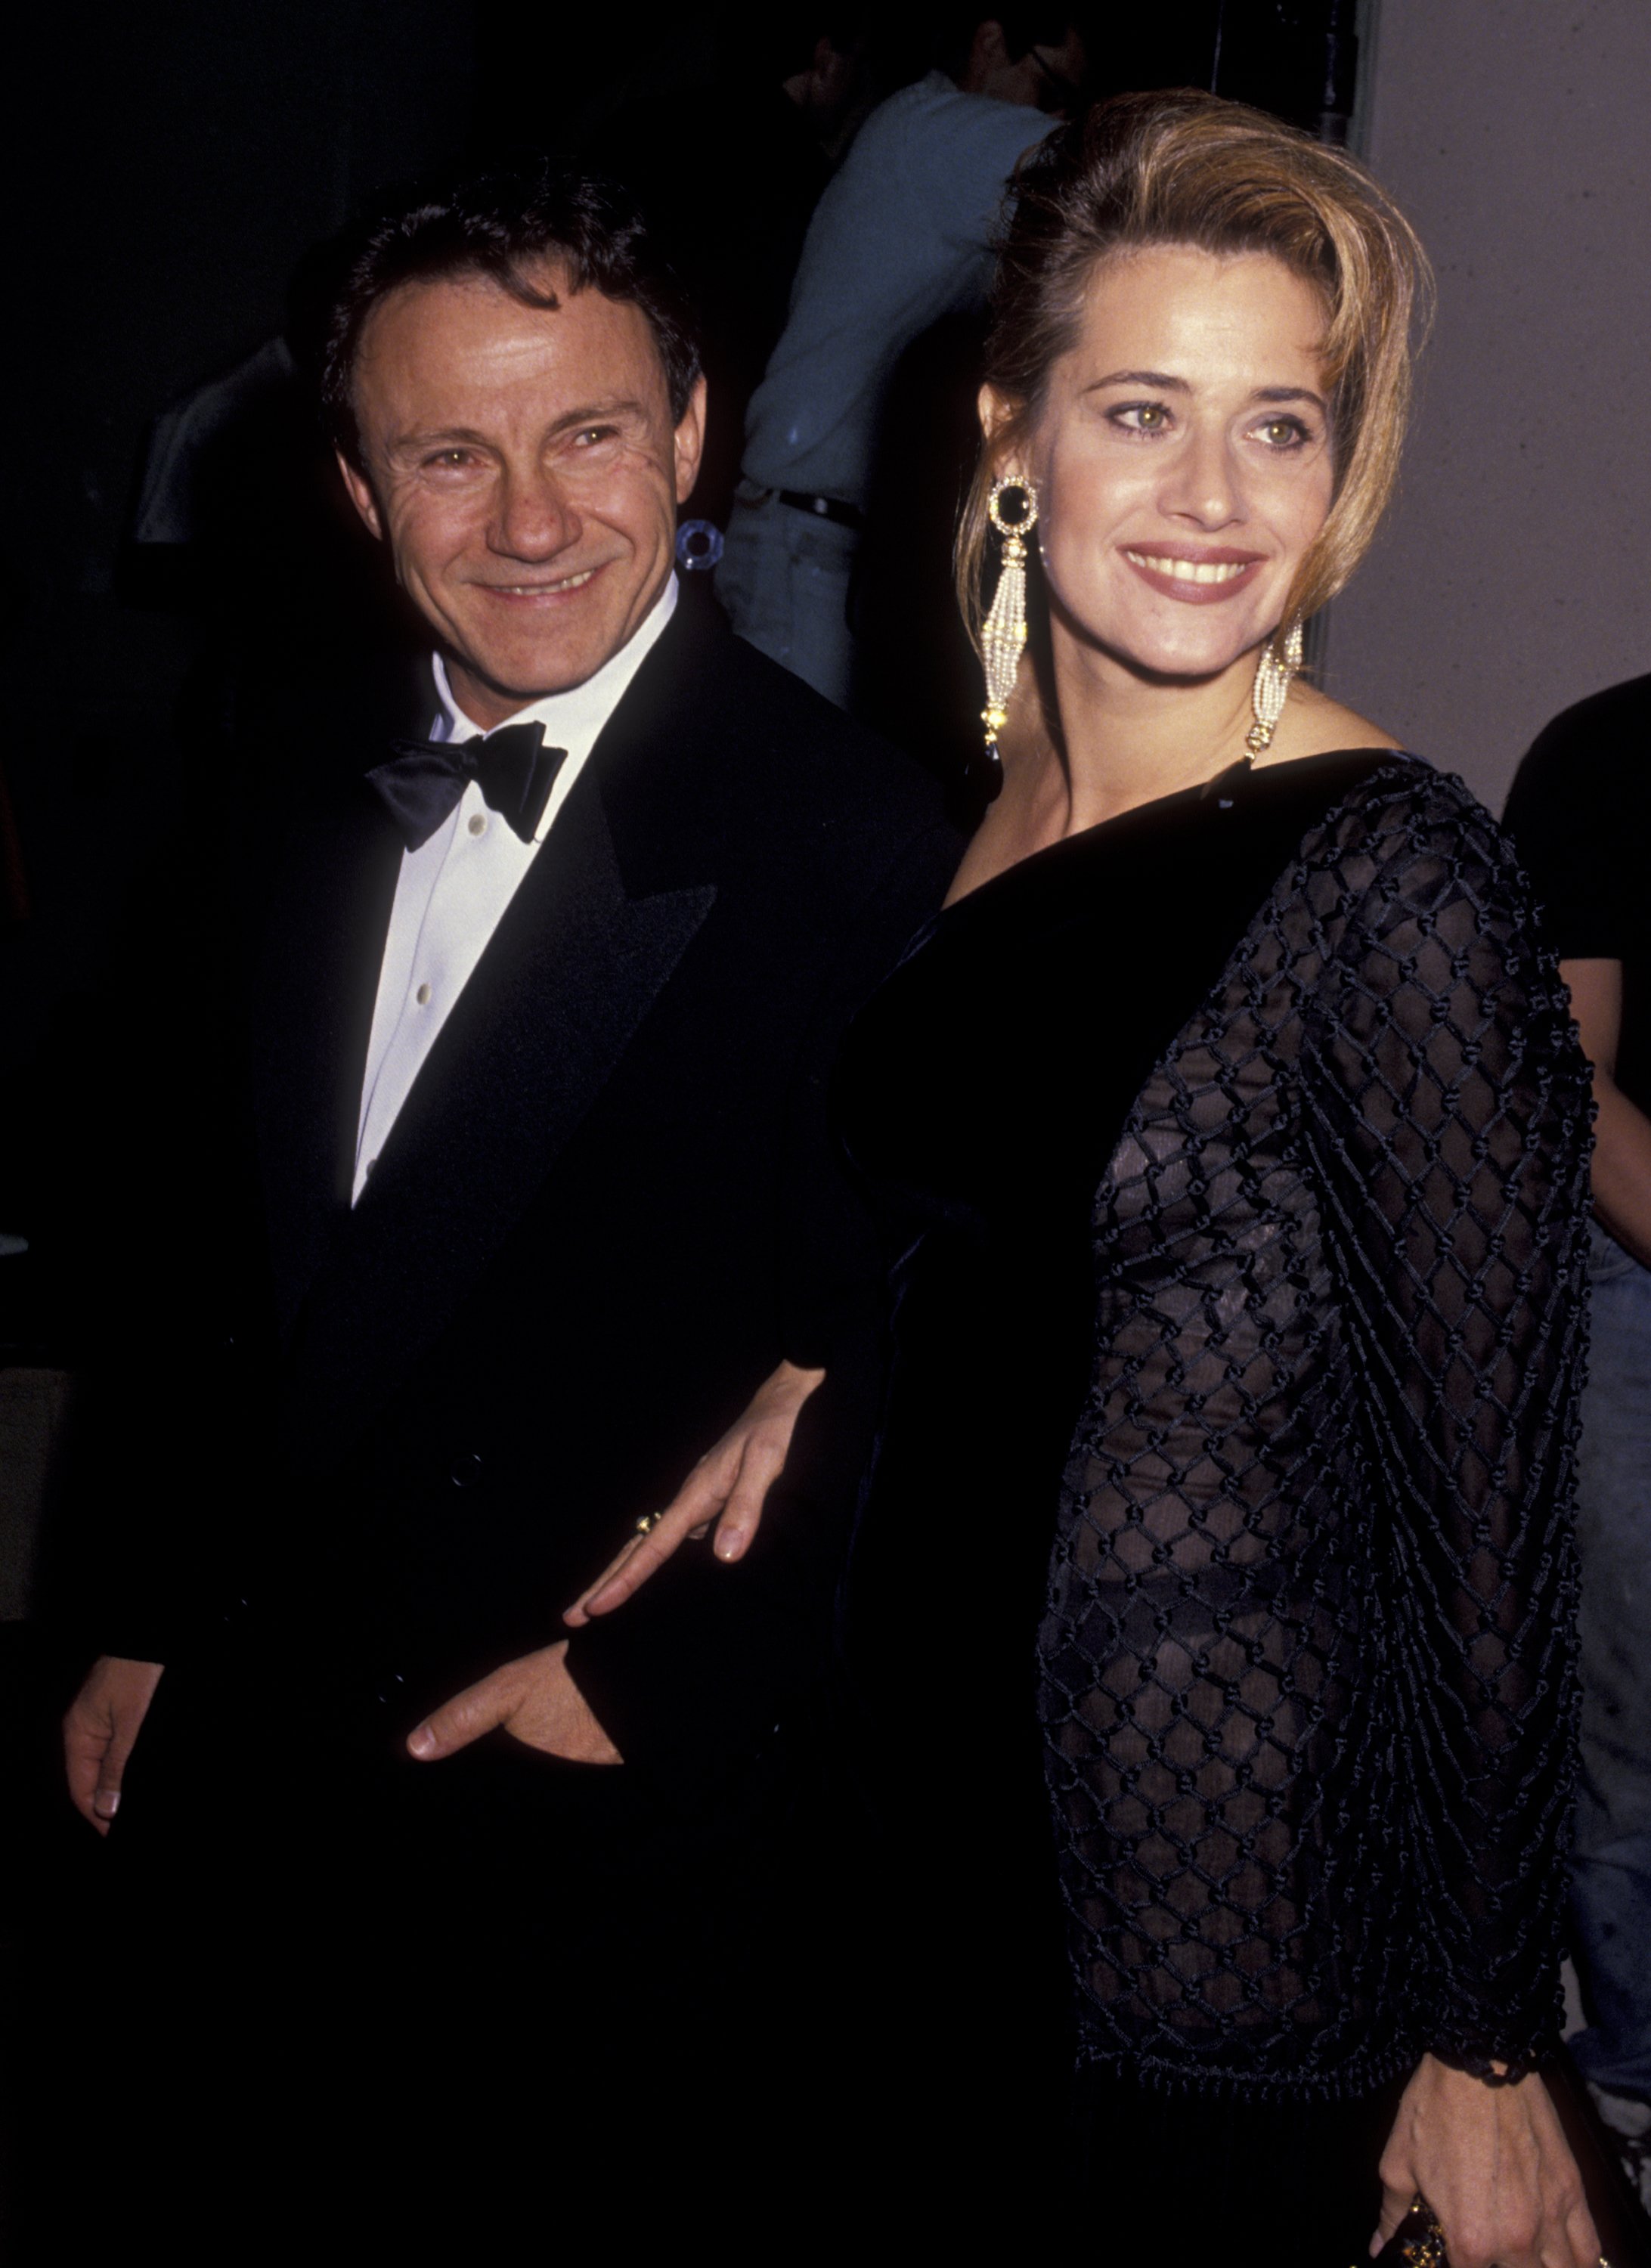 Harvey Keitel and Lorraine Bracco attend 48th Annual Golden Globe Awards on January 19, 1991 in Beverly Hills, California | Photo: Getty Images